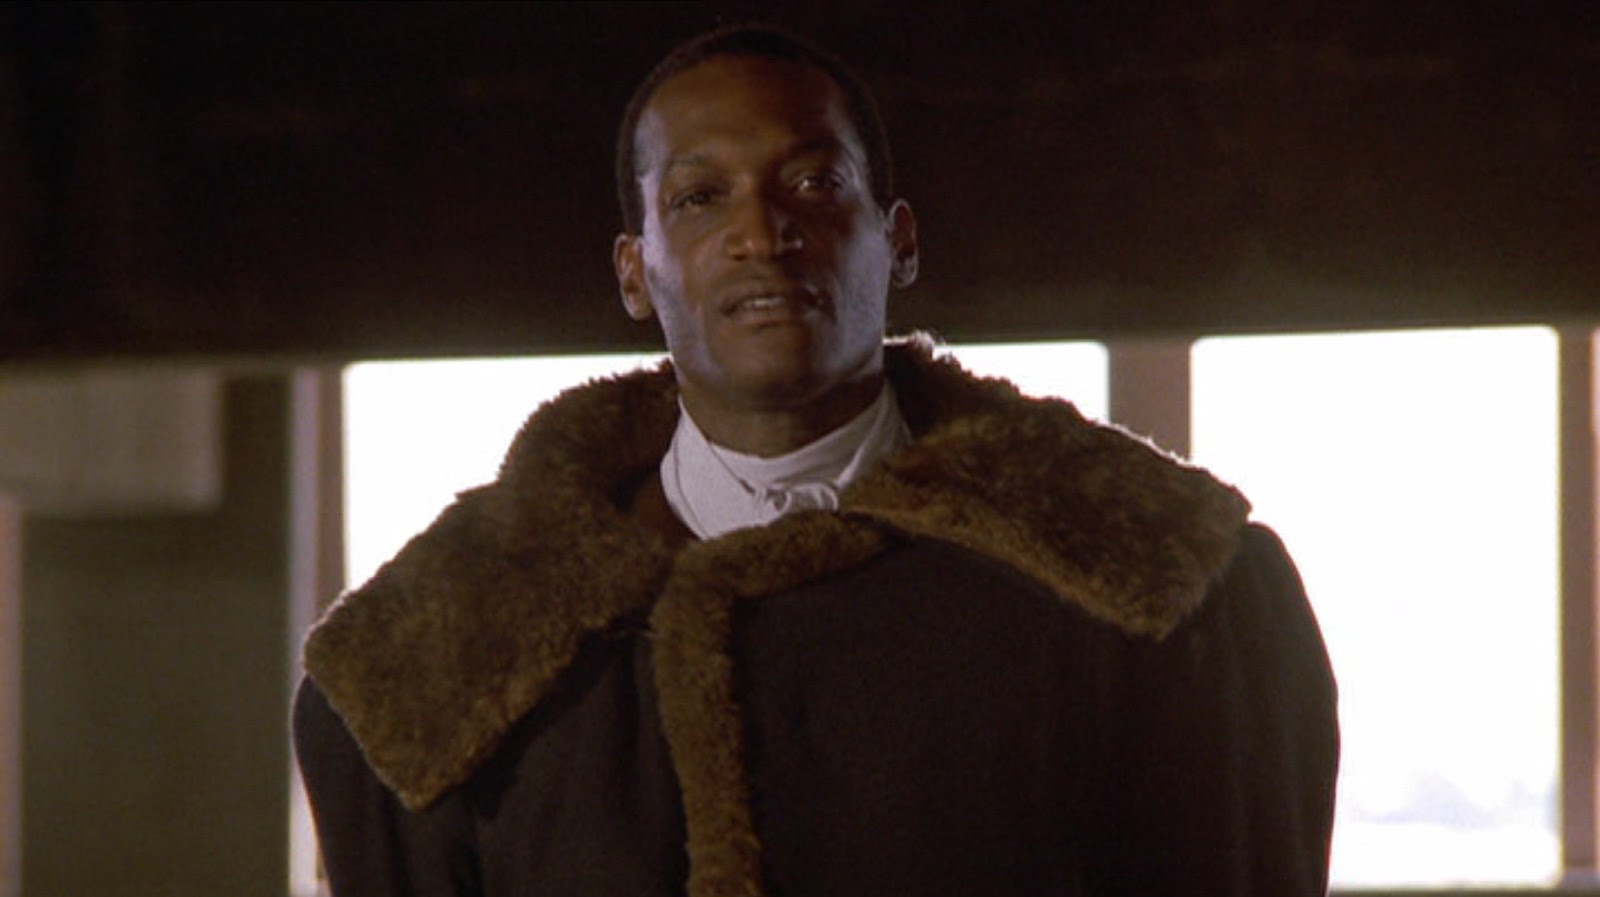 Tony Todd as the candyman in Candyman (1992).